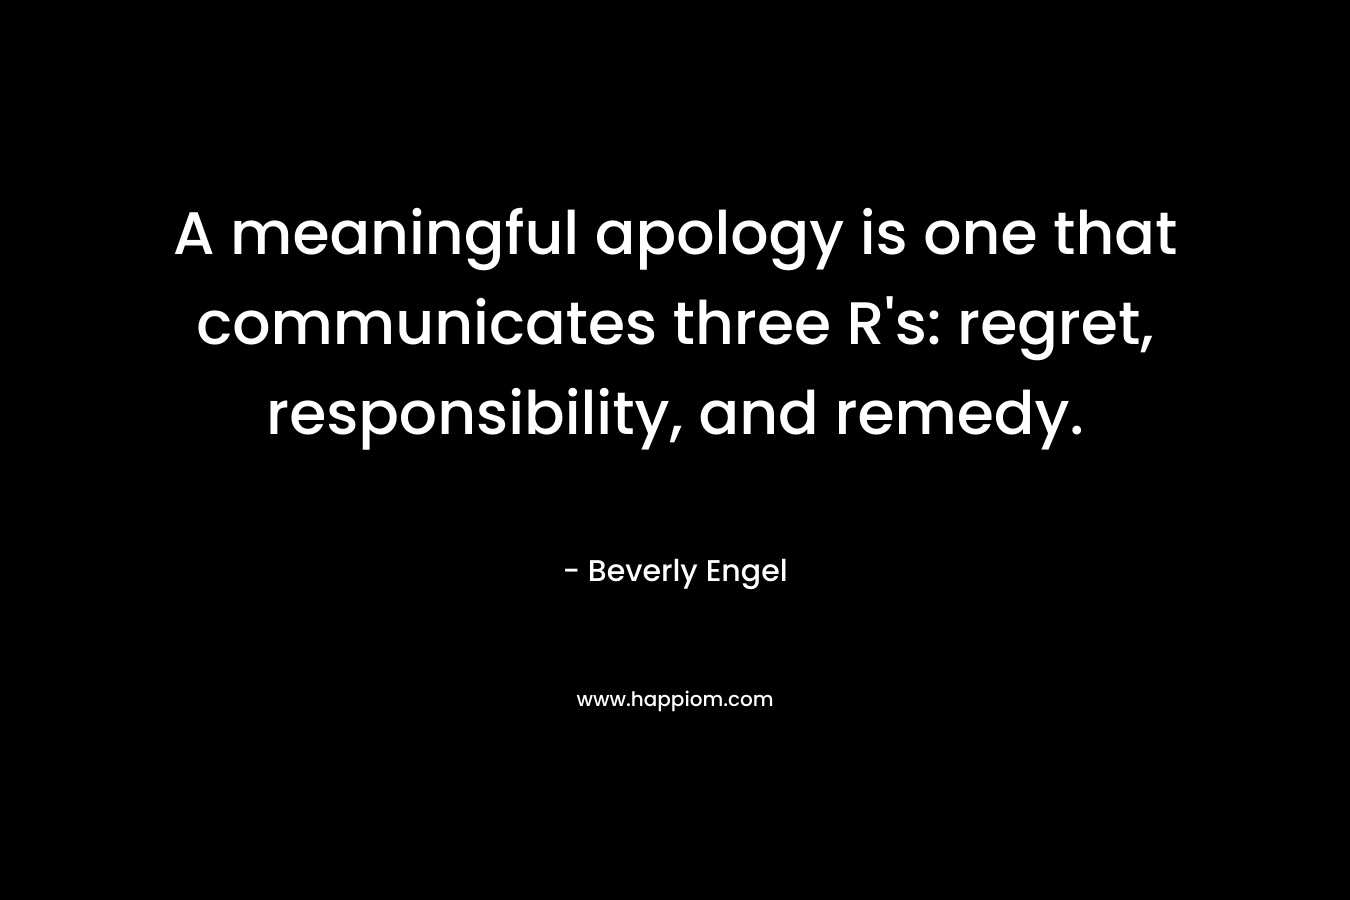 A meaningful apology is one that communicates three R’s: regret, responsibility, and remedy. – Beverly Engel